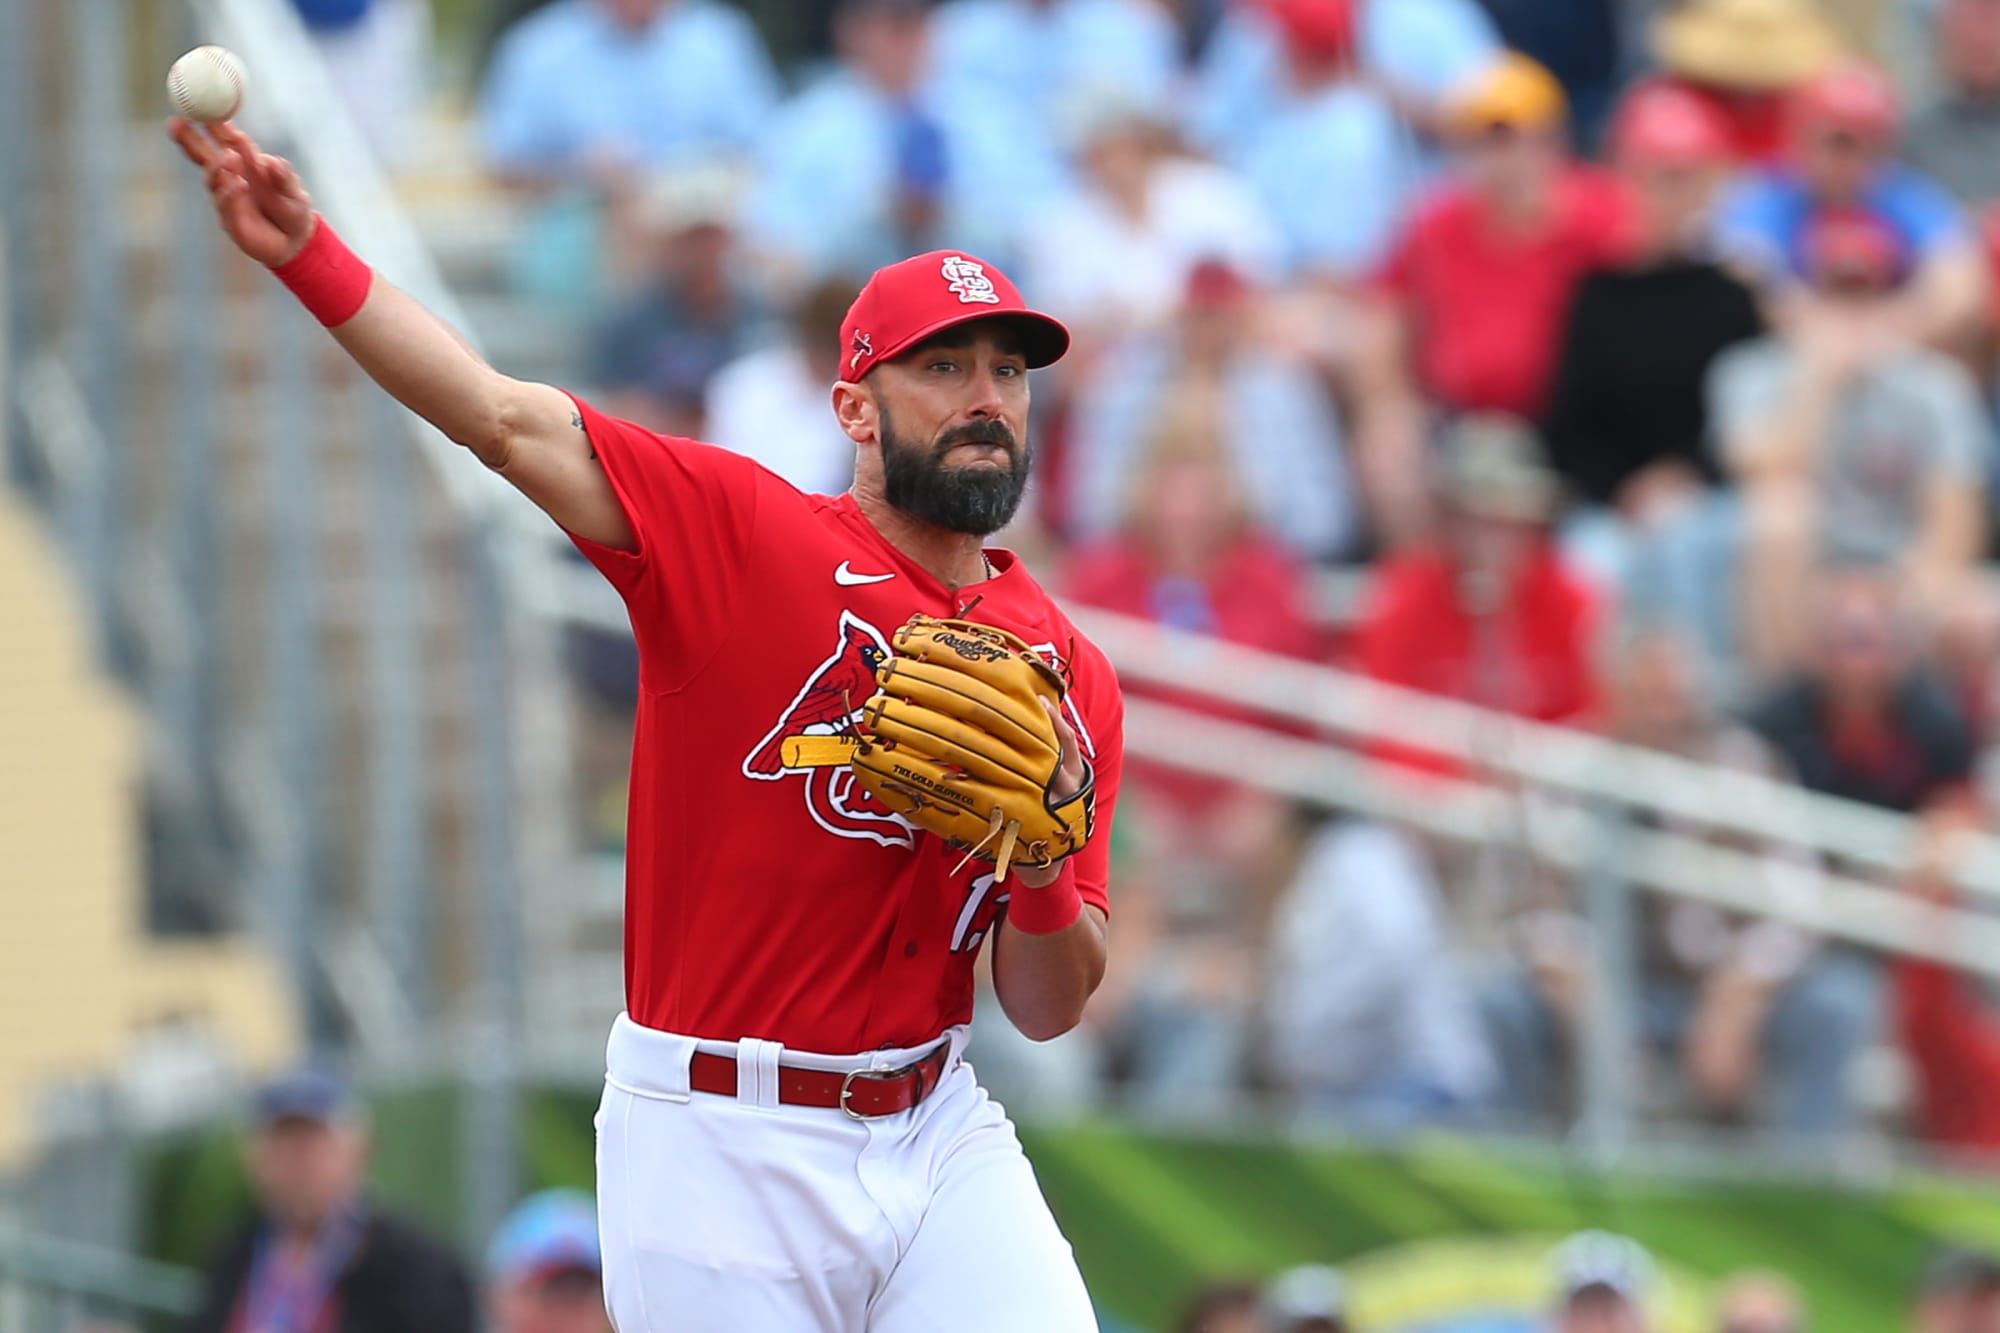 St. Louis Cardinals: MLB The Show players tournament update